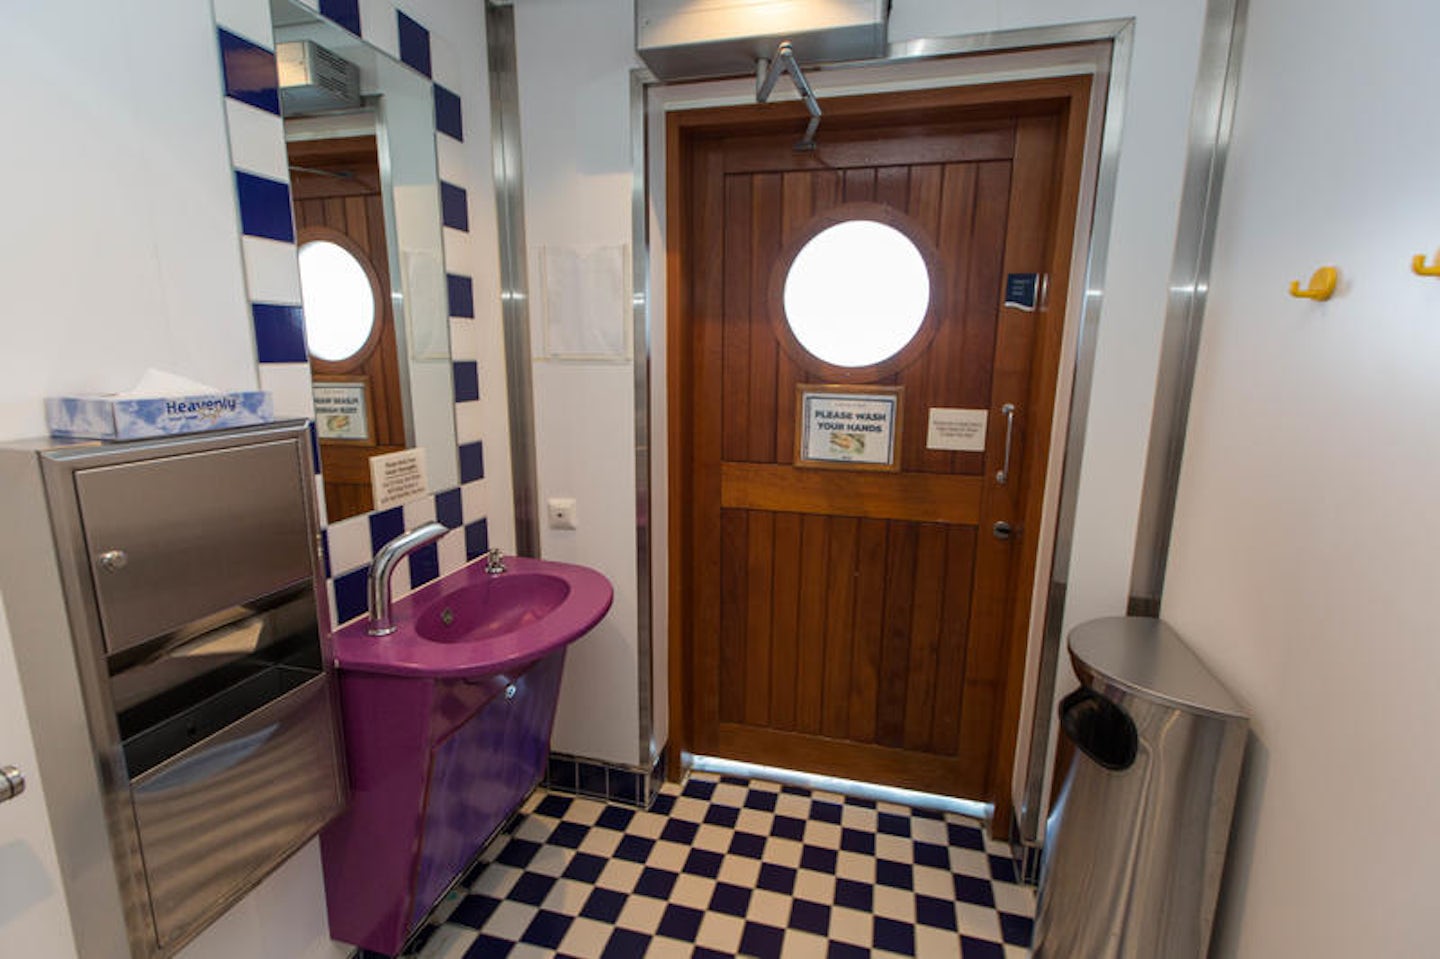 Restrooms on Liberty of the Seas